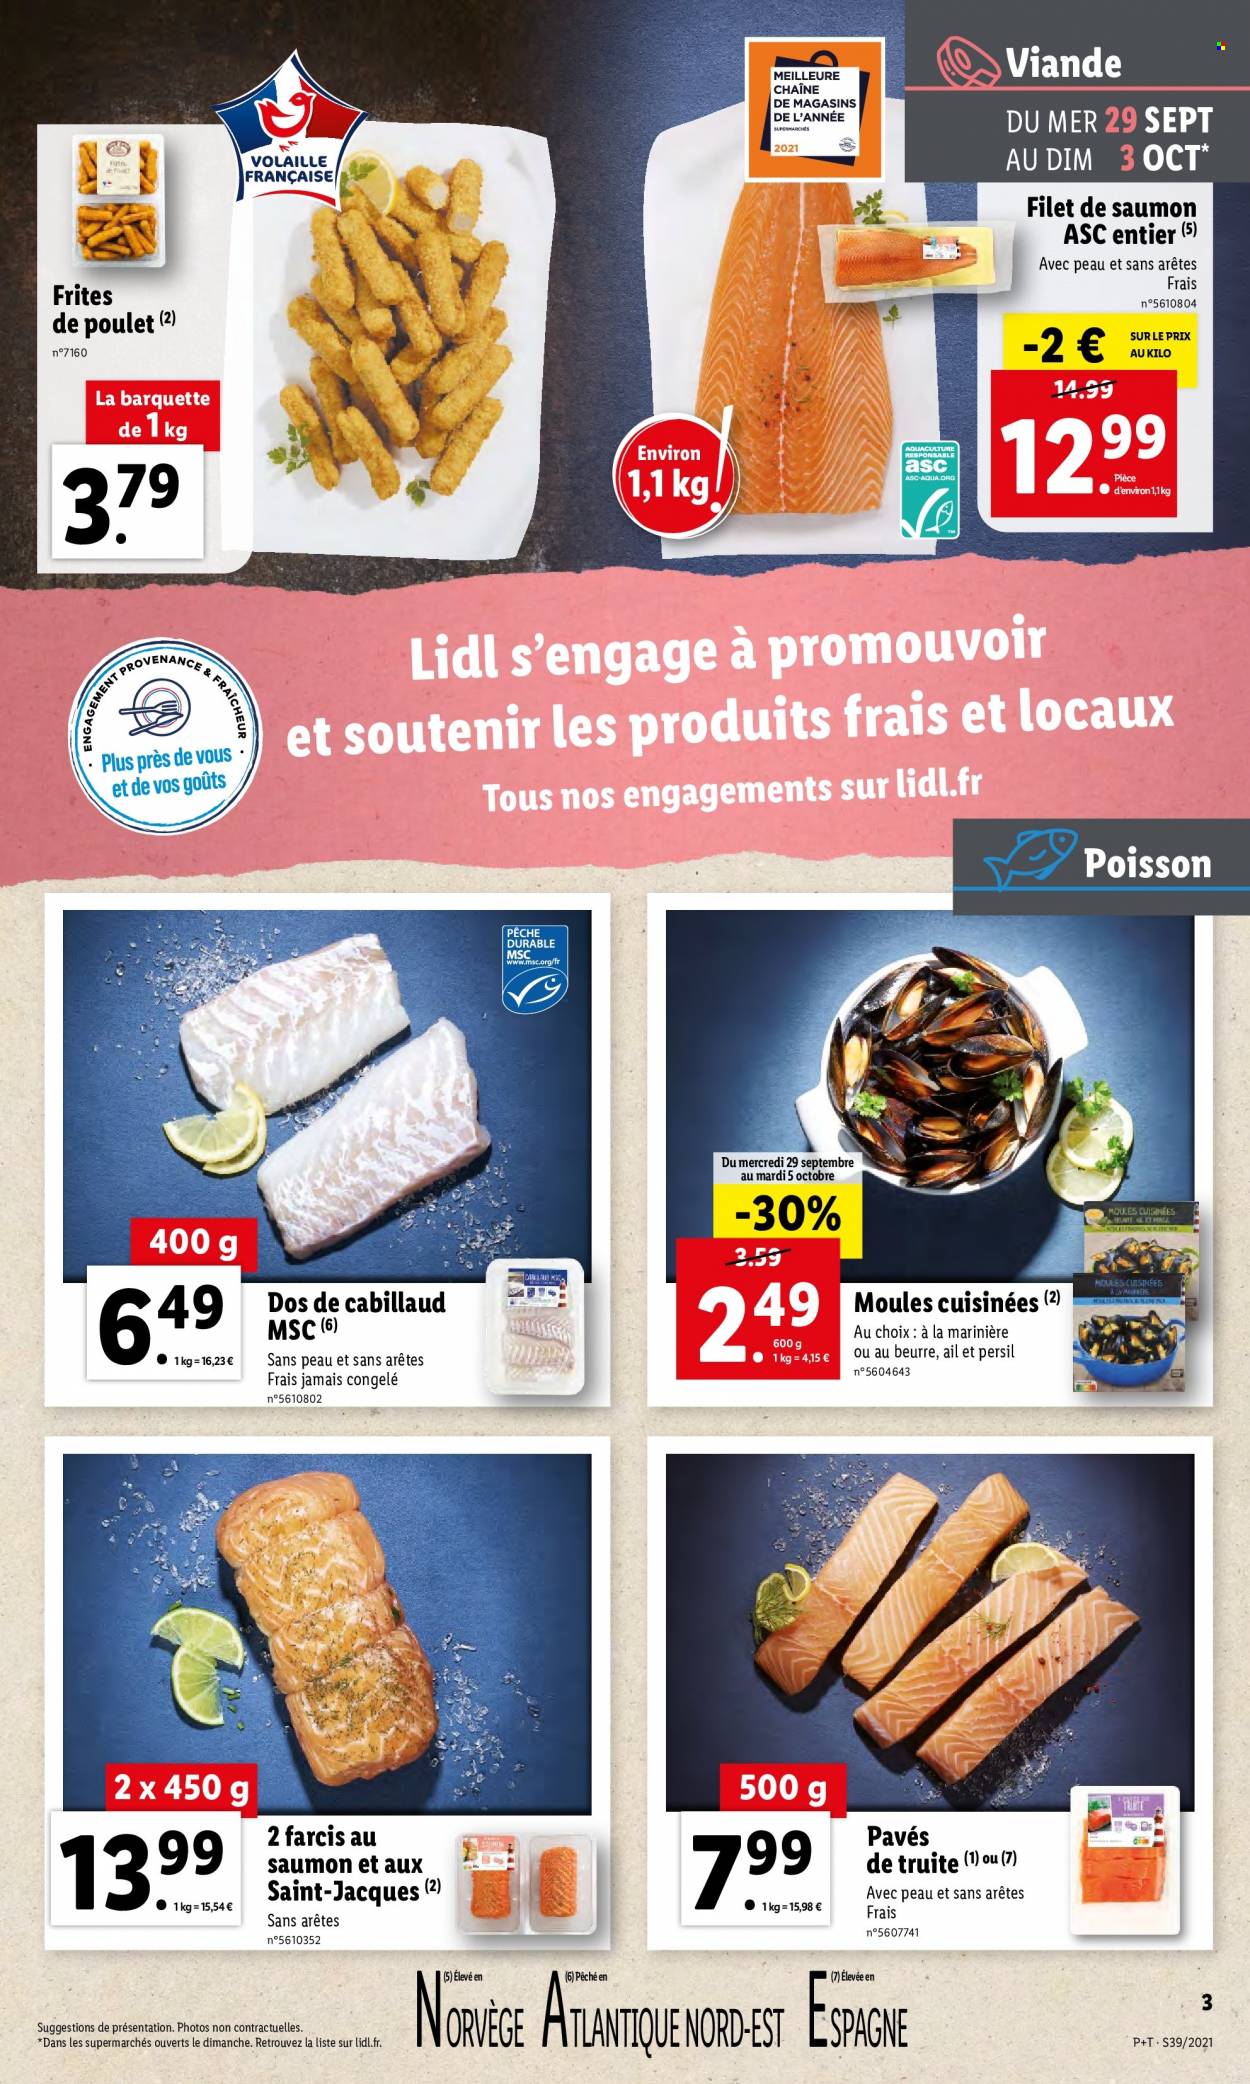 Catalogue Lidl - 29.09.2021 - 05.10.2021. Page 3.